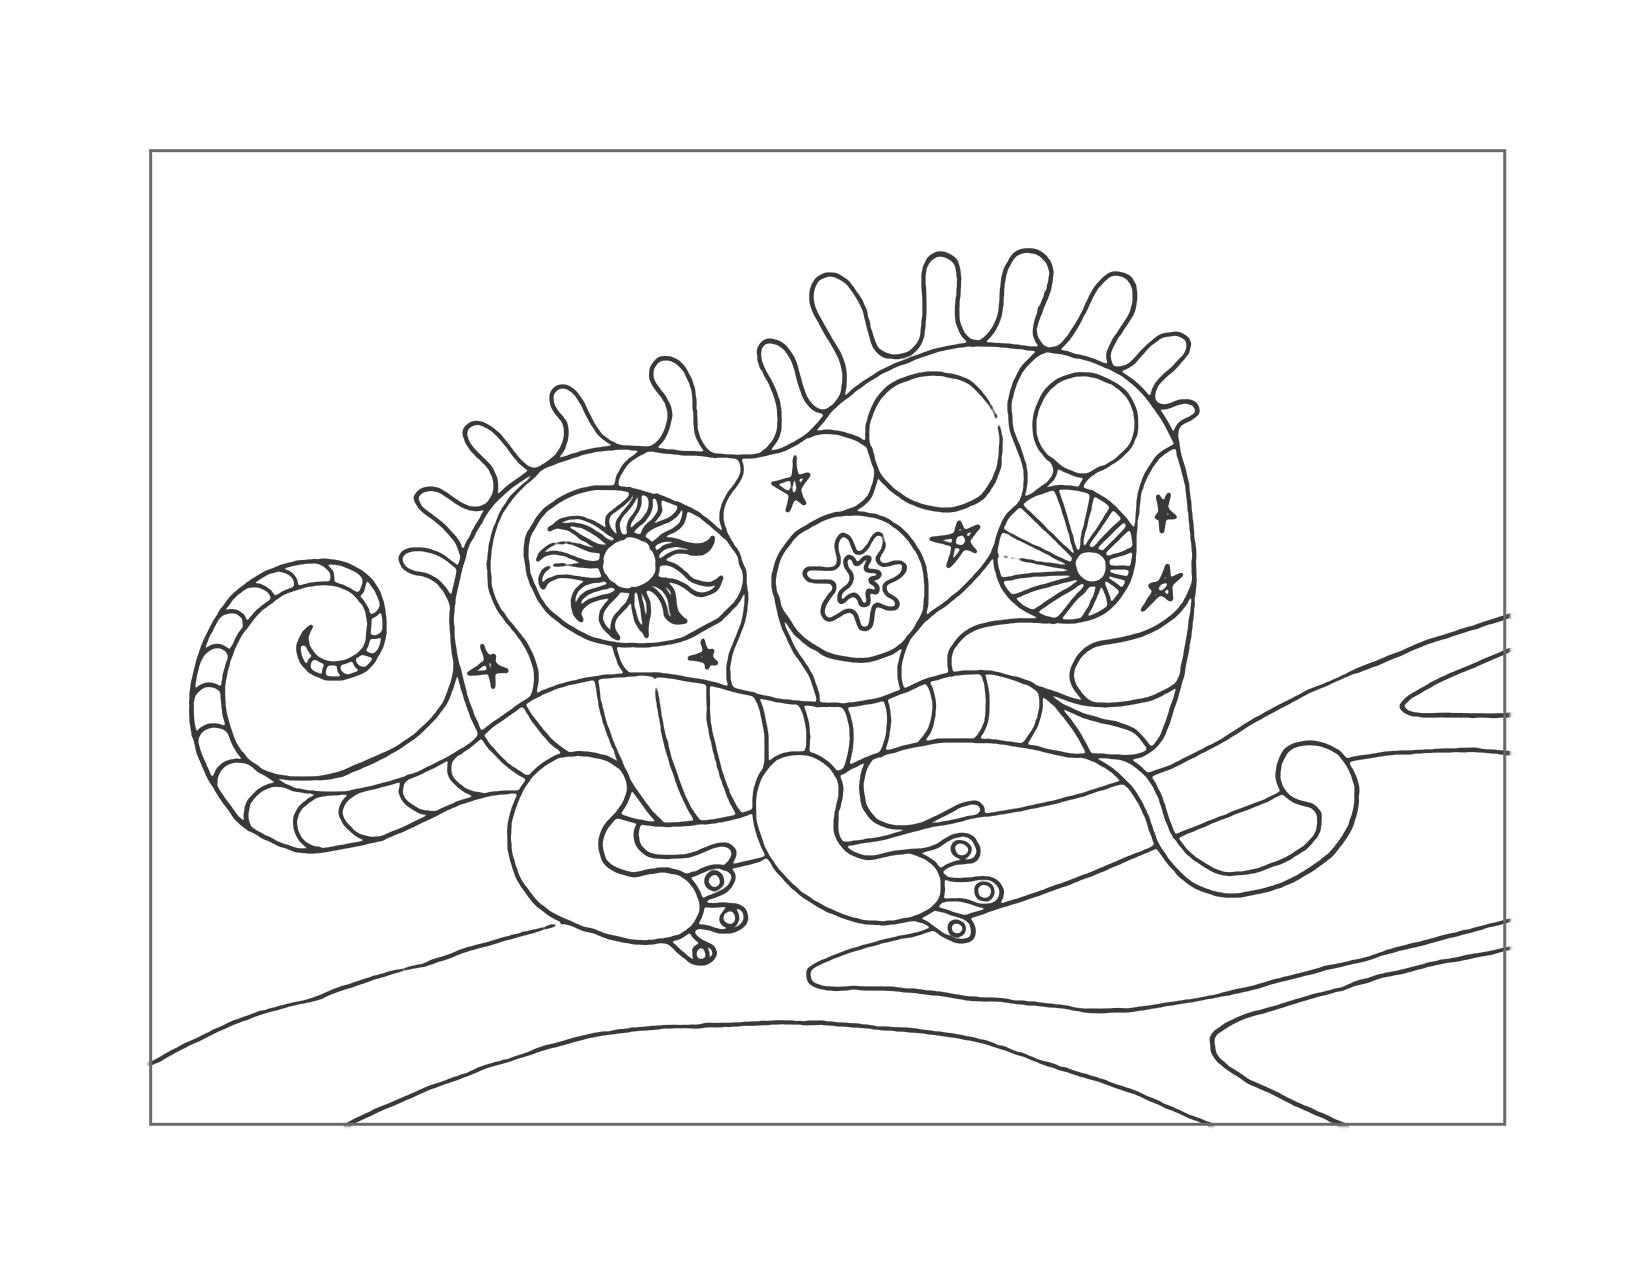 Funky Chameleon Coloring Page